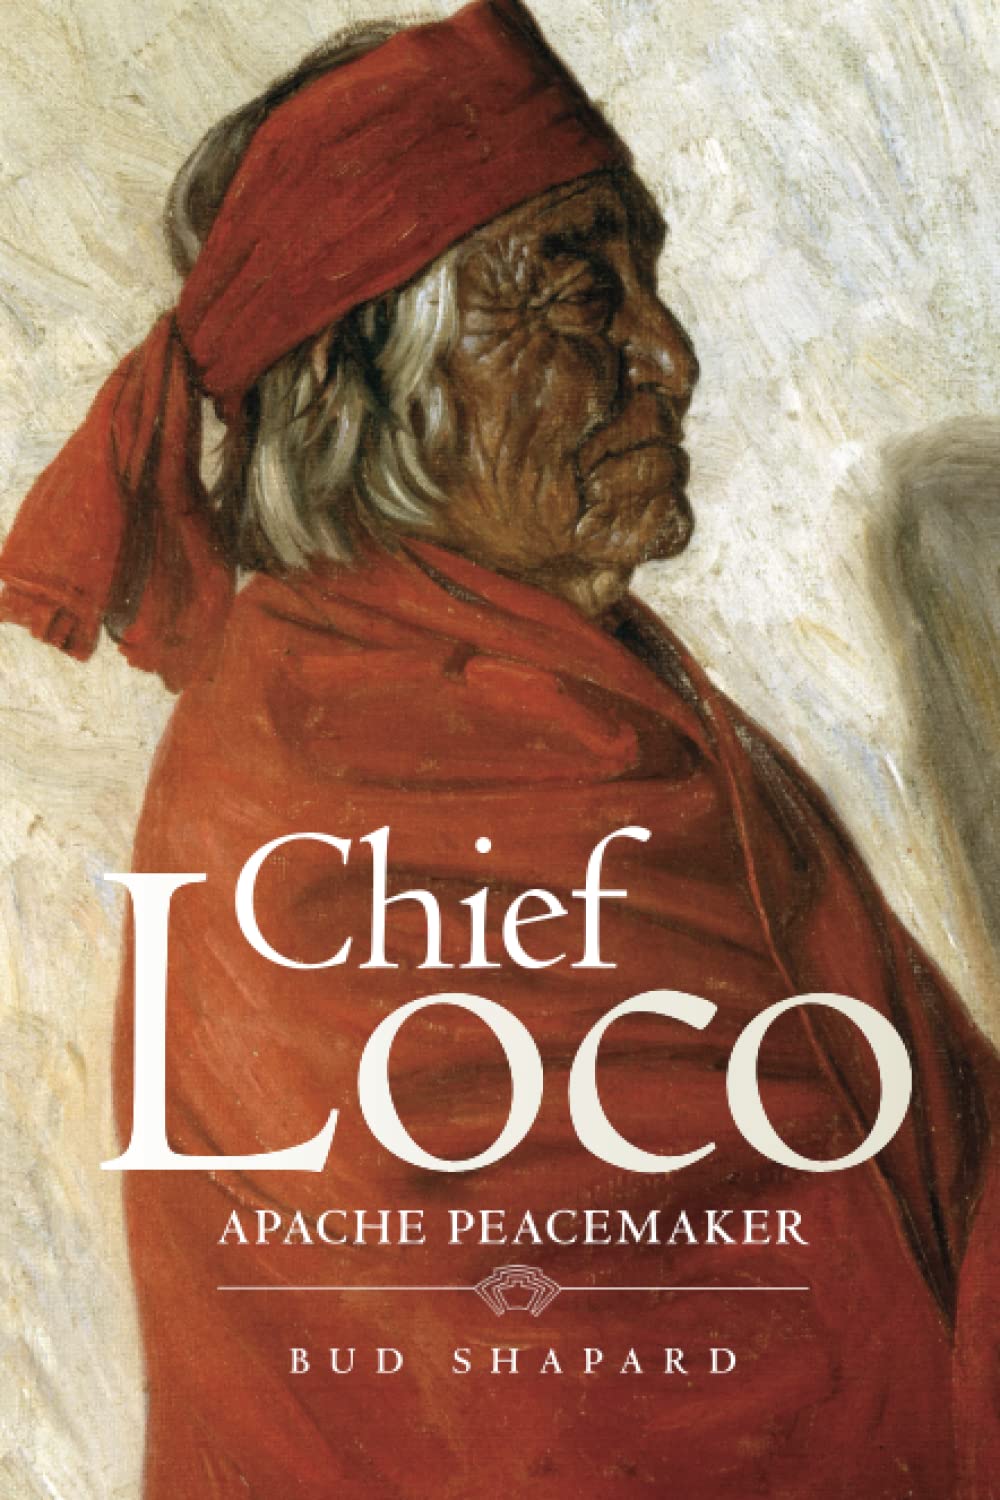 Chief Loco: Apache Peacemaker by Bud Shapard